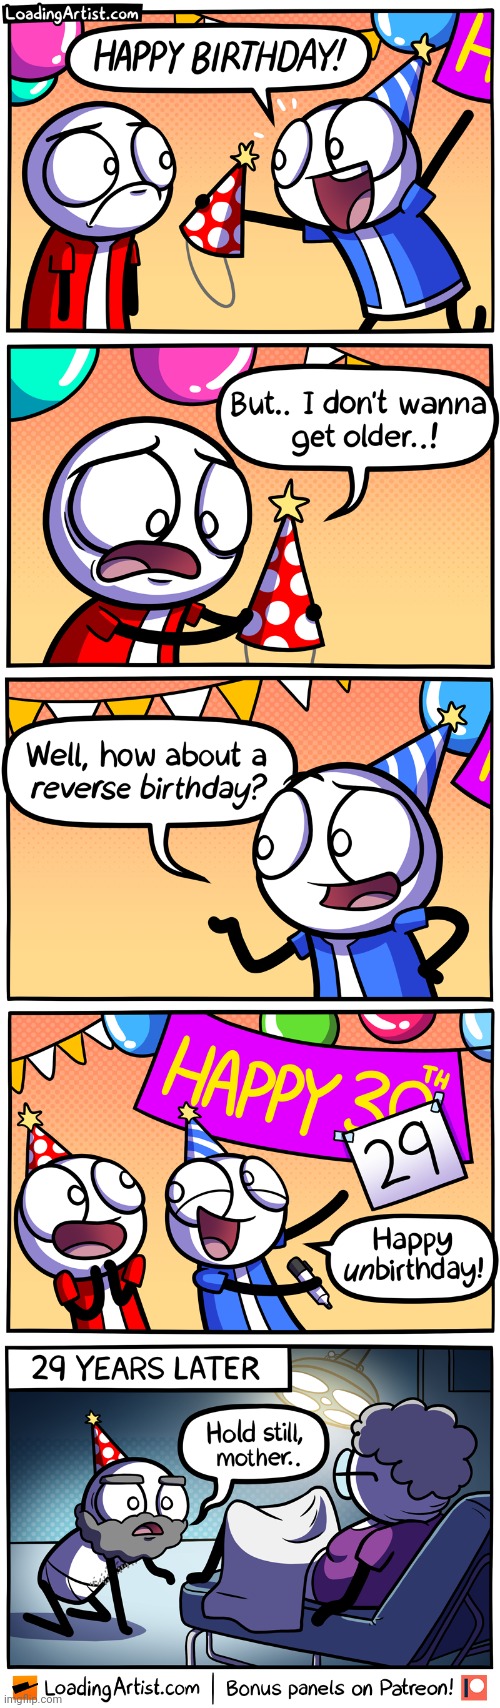 #2,439 | image tagged in comics/cartoons,comics,loading,artist,birthday,young | made w/ Imgflip meme maker